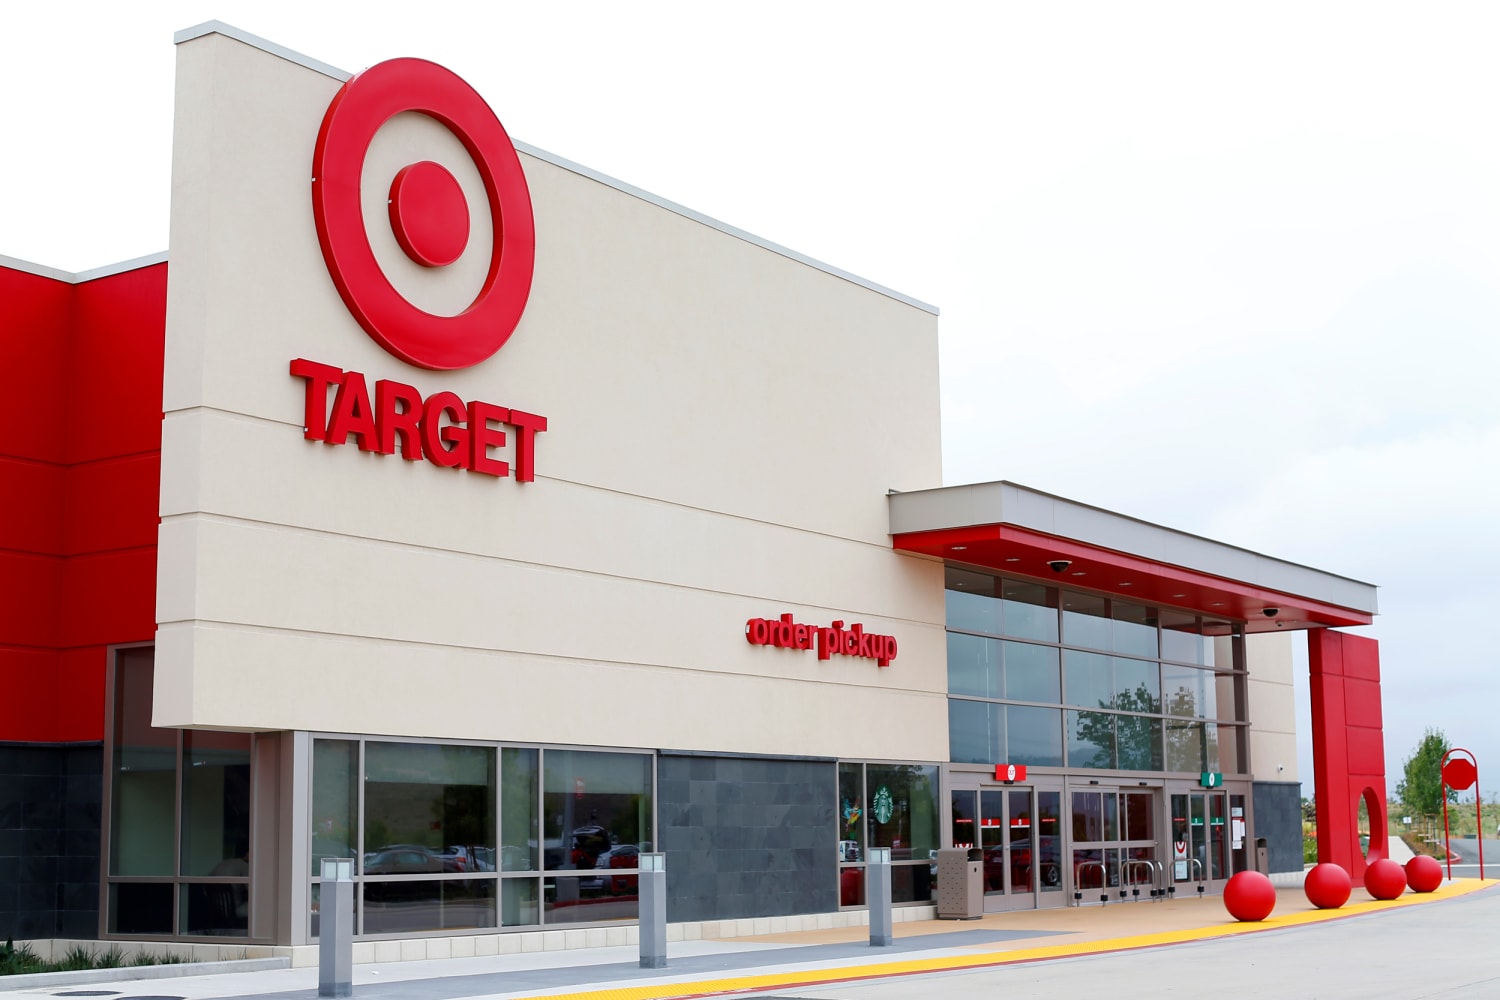 How to save time and money while shopping at Target